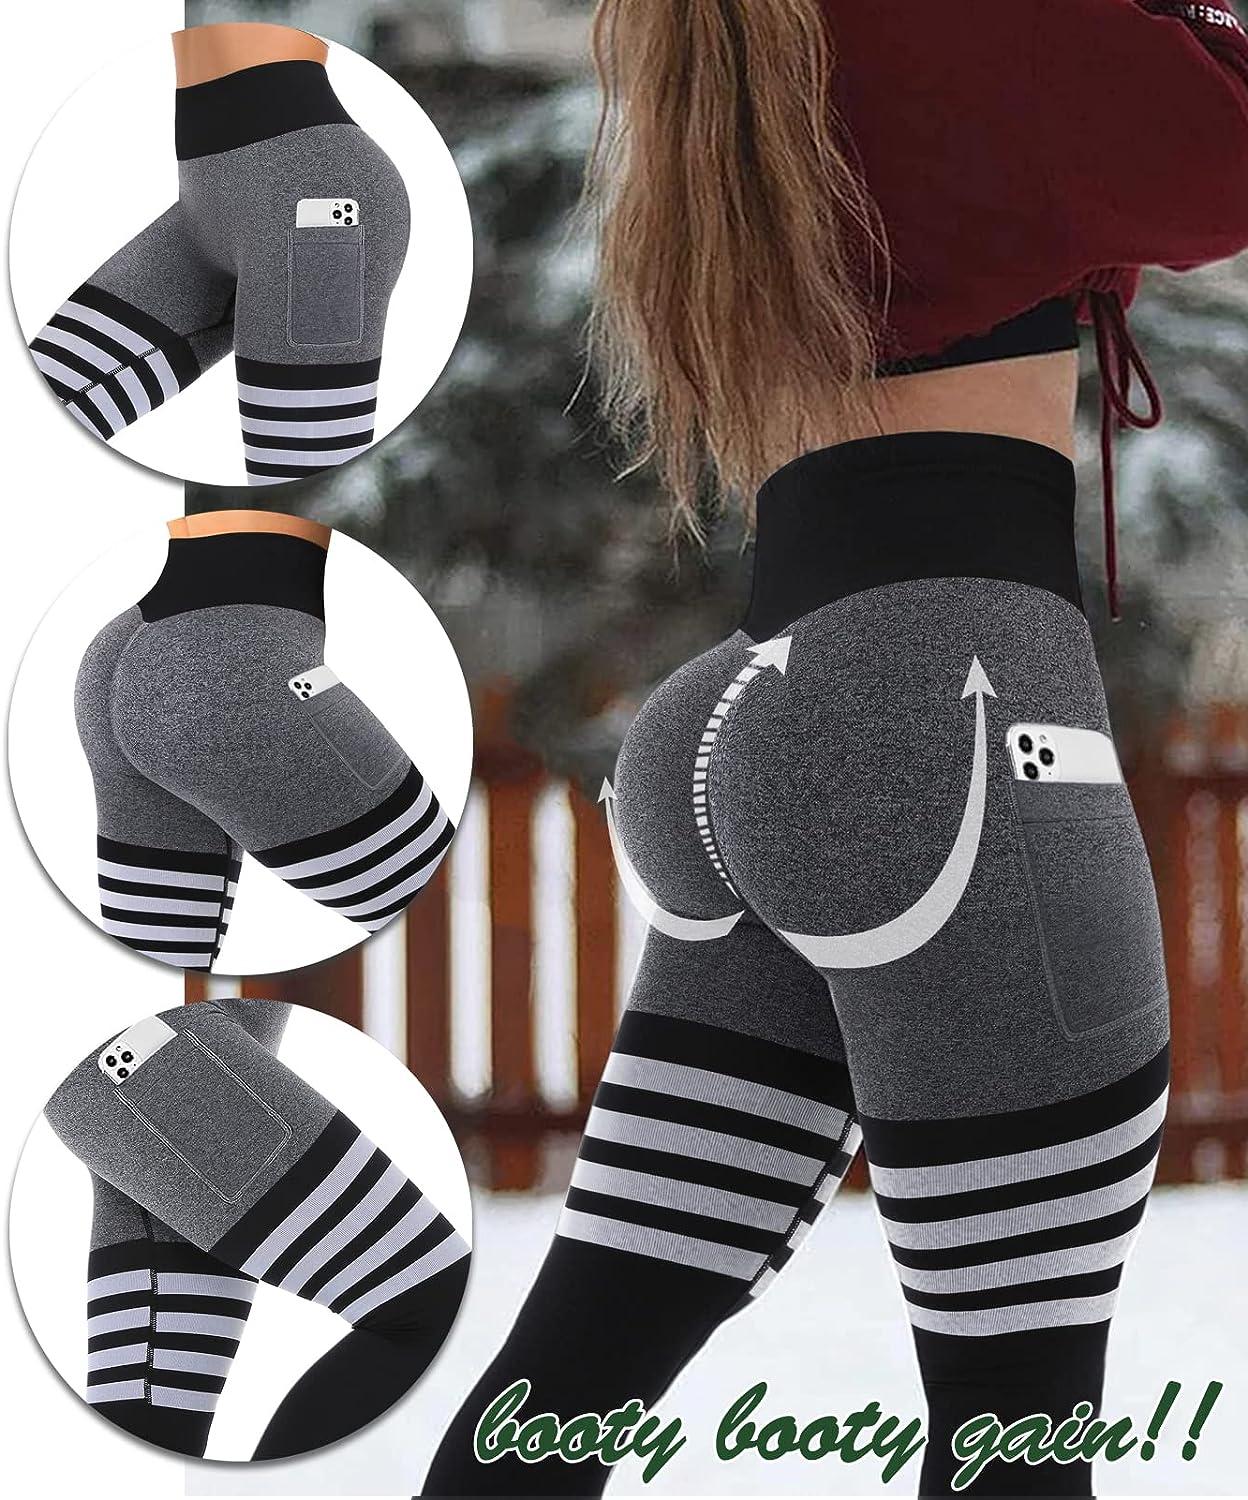 High Waisted Leggings for Women Stretch Tummy Control Butt Lifting Yoga  Pants Sport Active Fitness Workout Tights